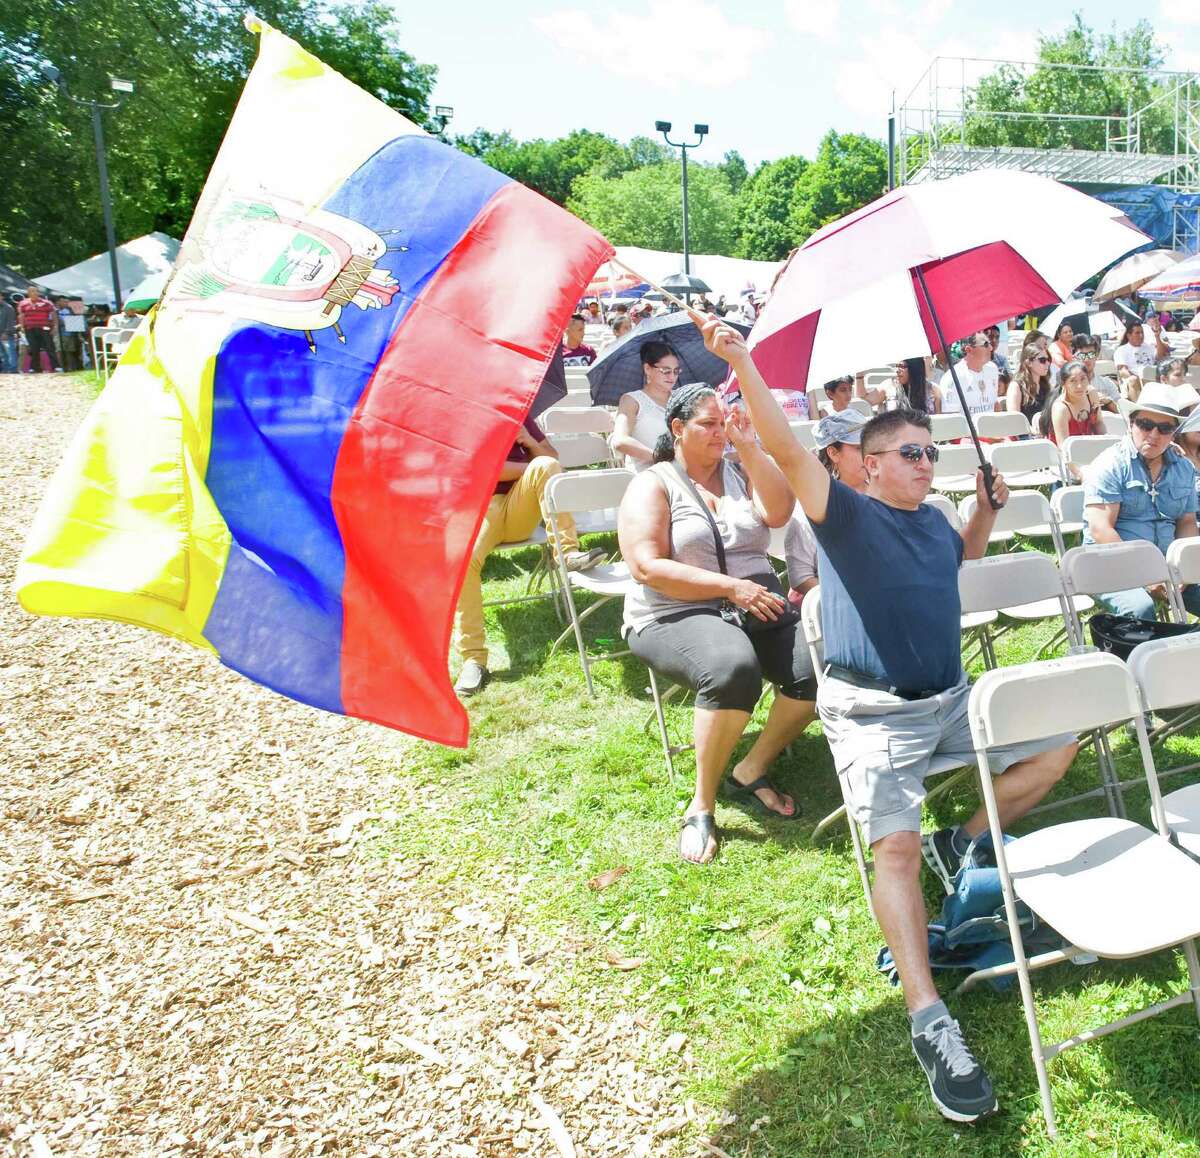 Angel Capon waves the flag of Ecuador at the annual Ecuadorian festival held at the Ives Concert Park in Danbury. Sunday, Aug. 9, 2015